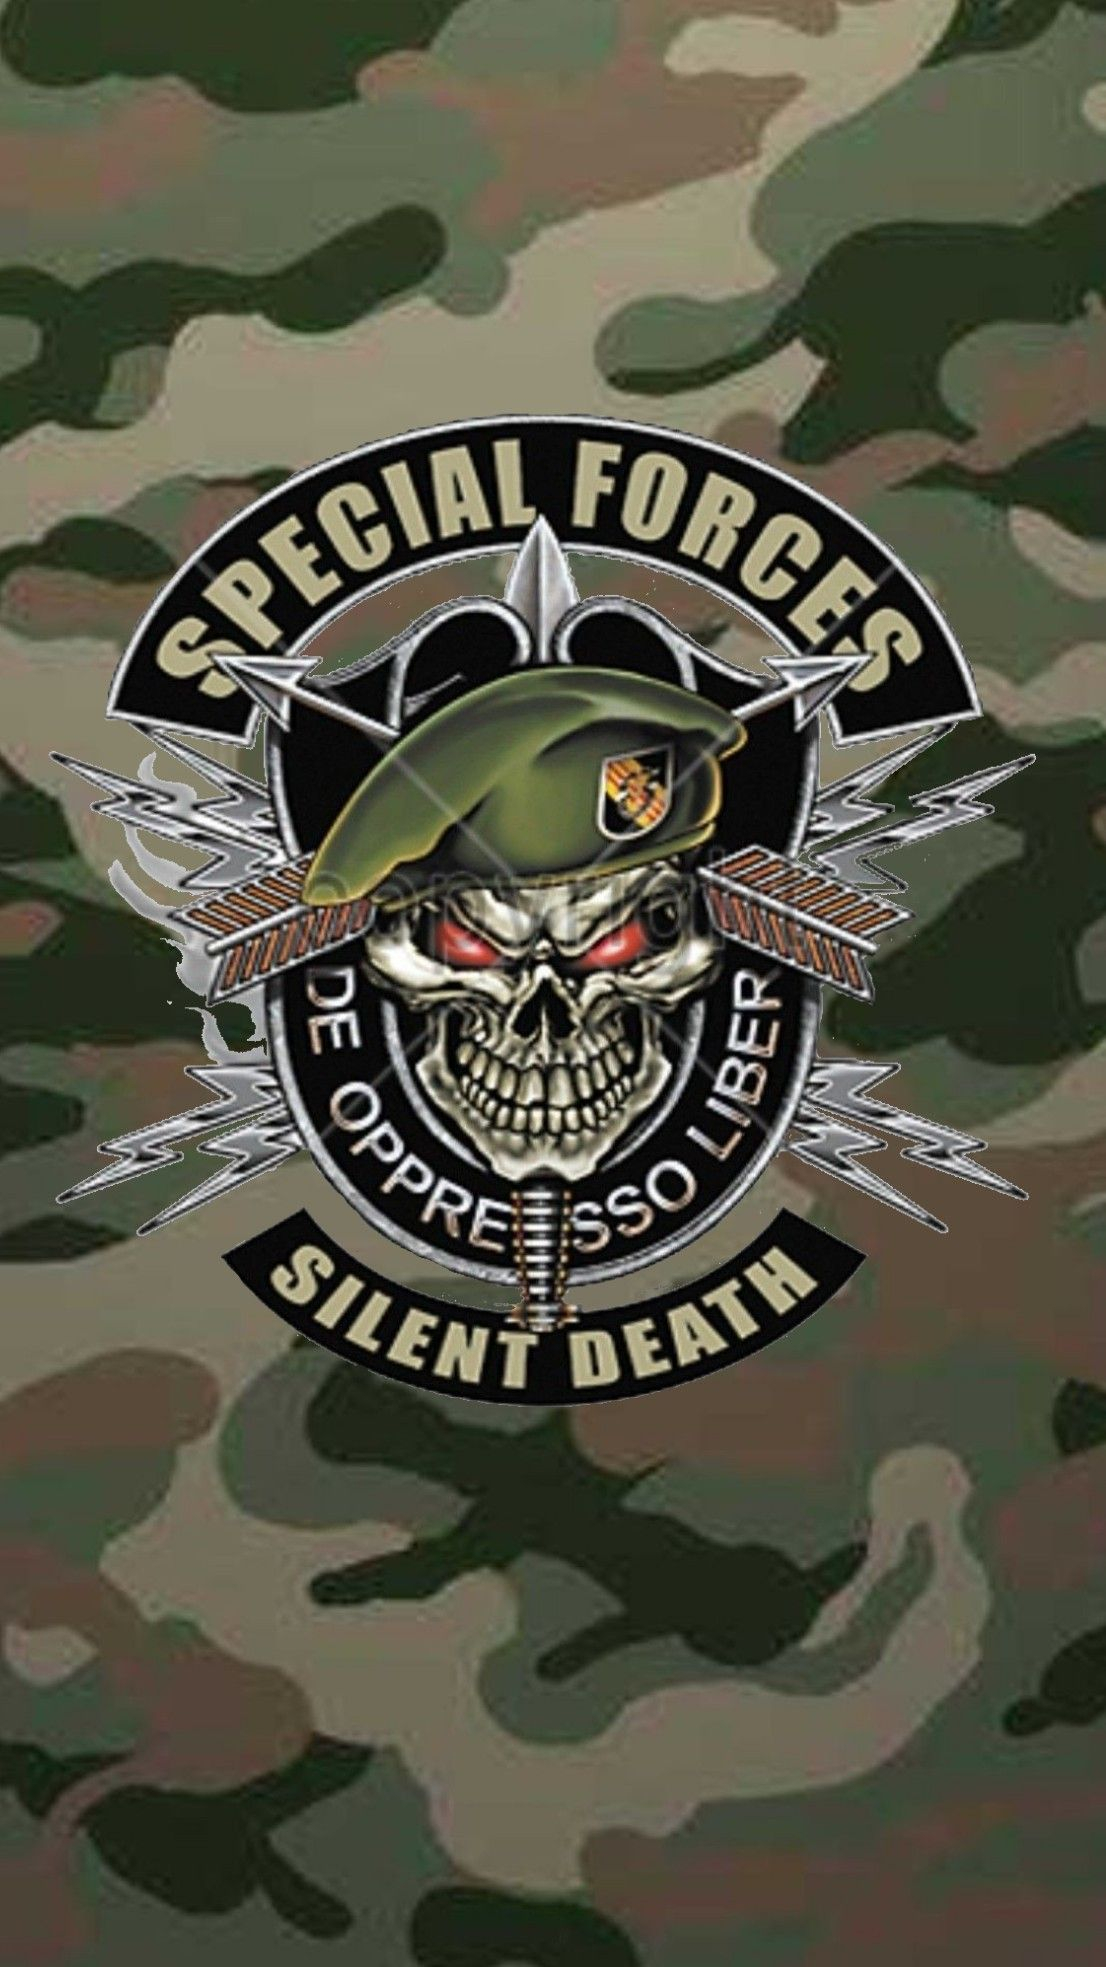 1106x1967 Pin by mcfaddin on Military artwork | Special forces logo, Military special forces, Special forces